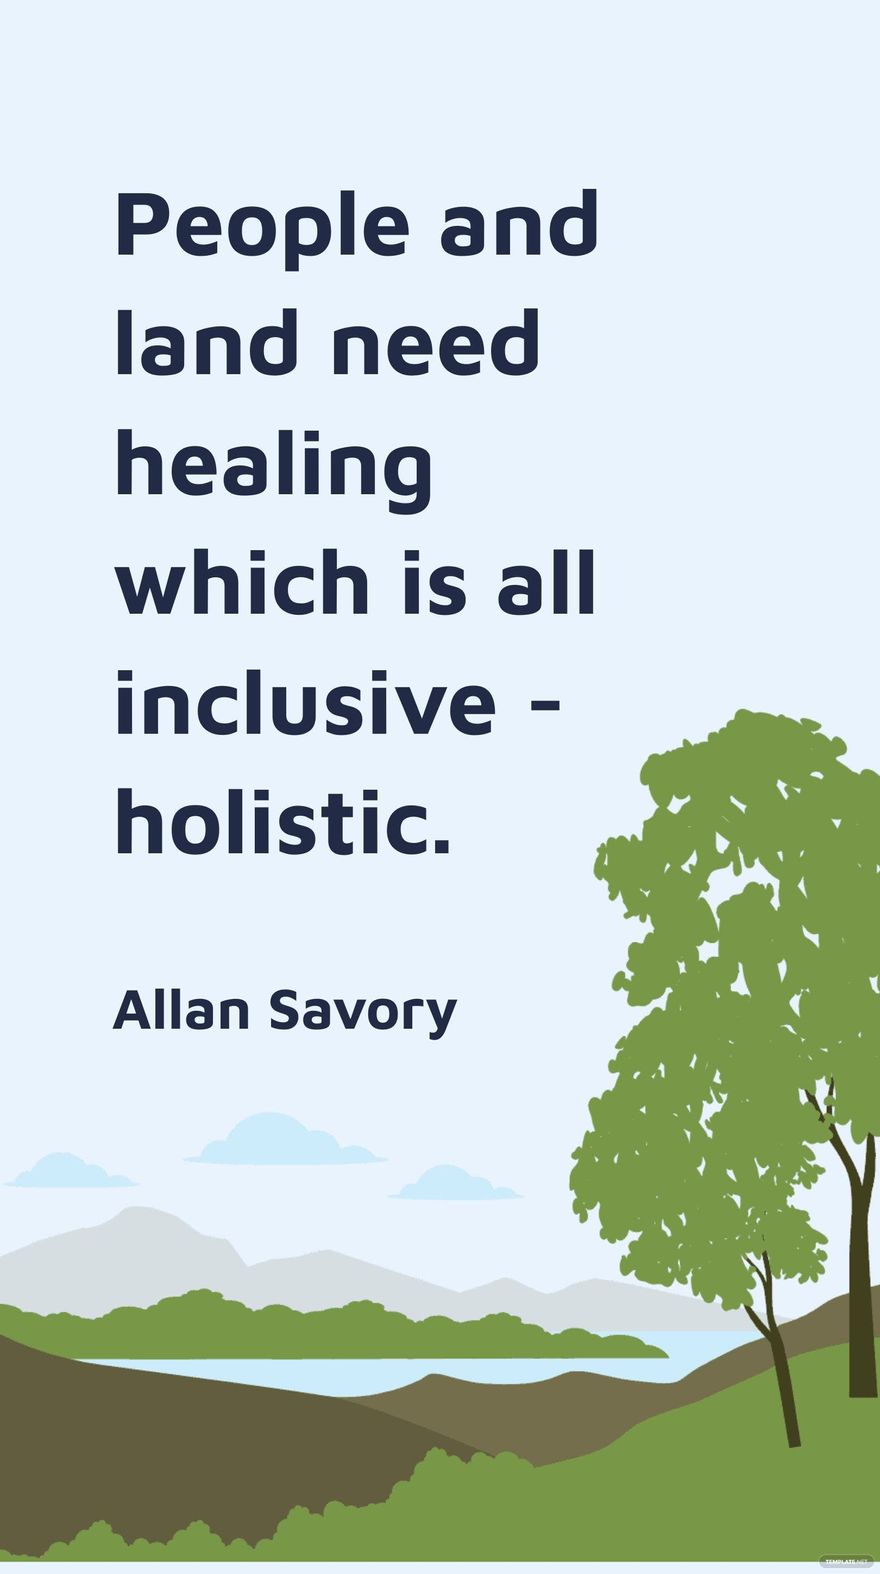 Allan Savory - People and land need healing which is all inclusive - holistic. Template